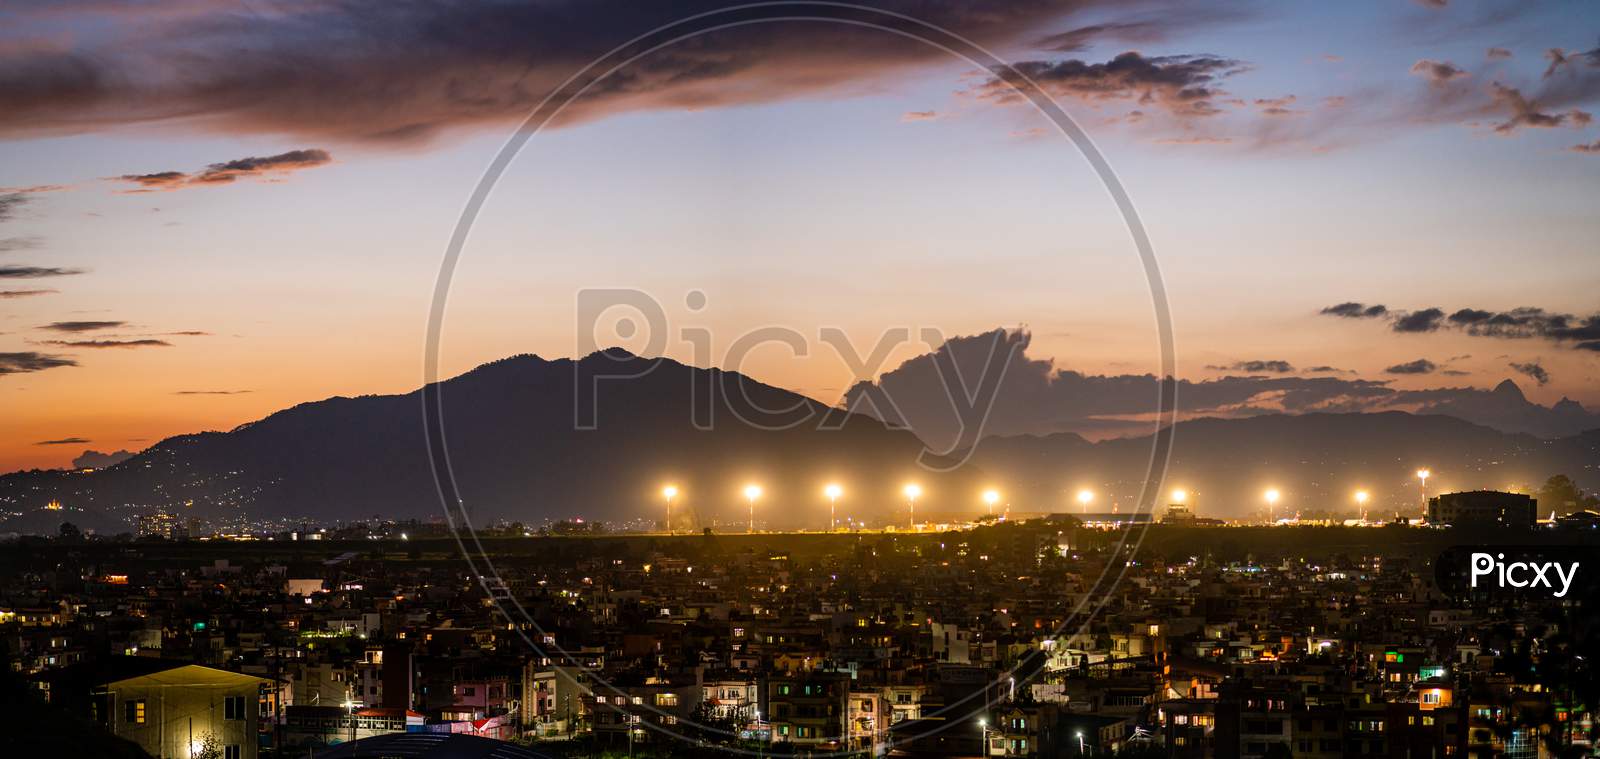 Kathmandu skyline with views of airport lights at night. Monsoon clouds and hills are visible at a distance.